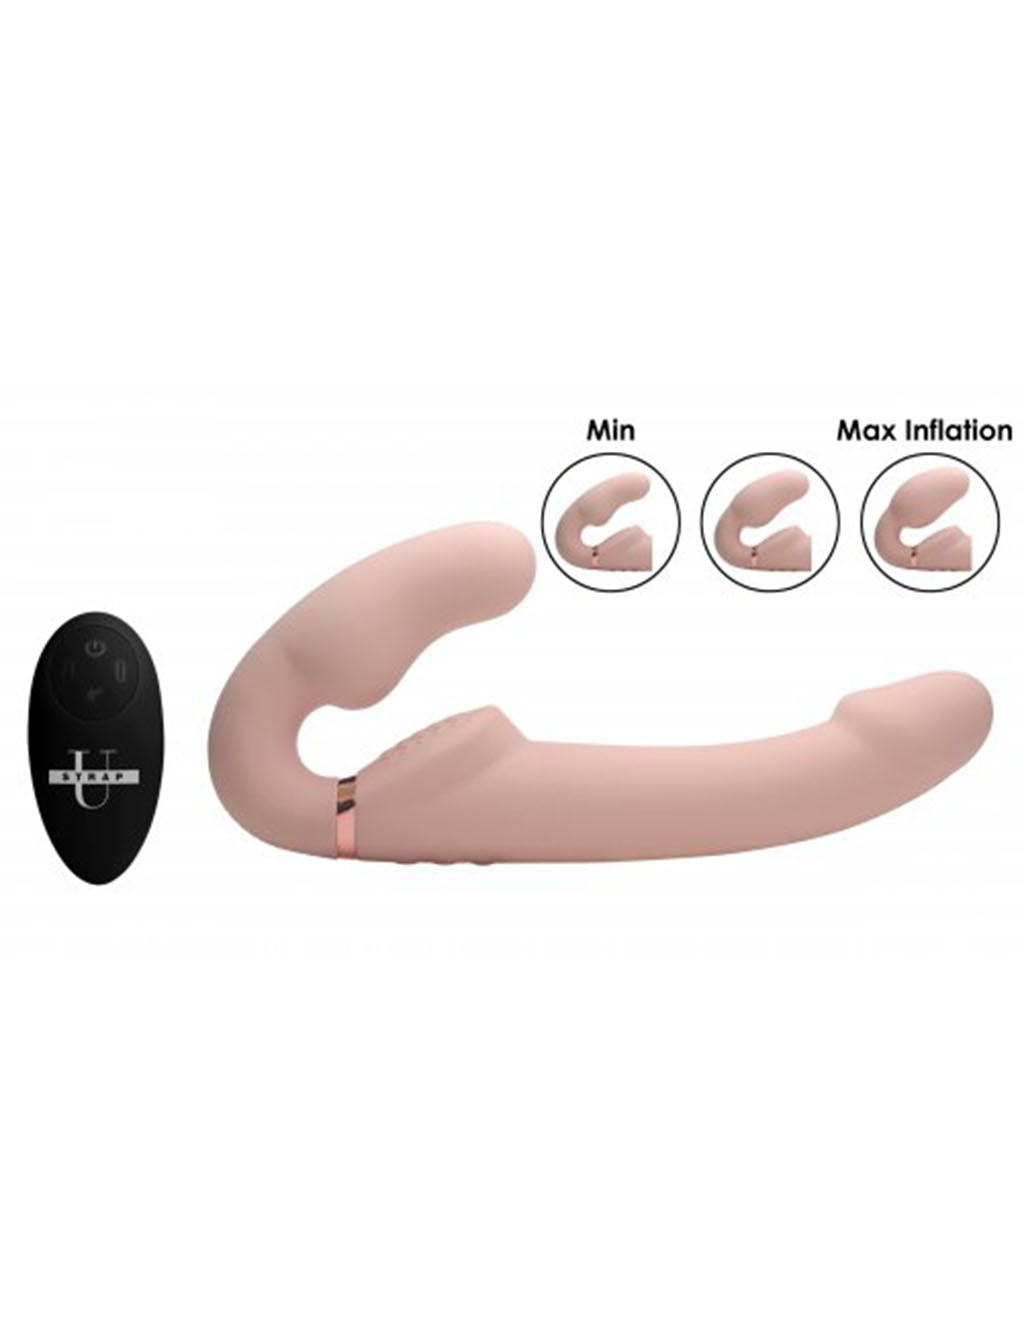 Strap U Inflatable Vibrating Strapless Strap-On- Vanilla- With remote